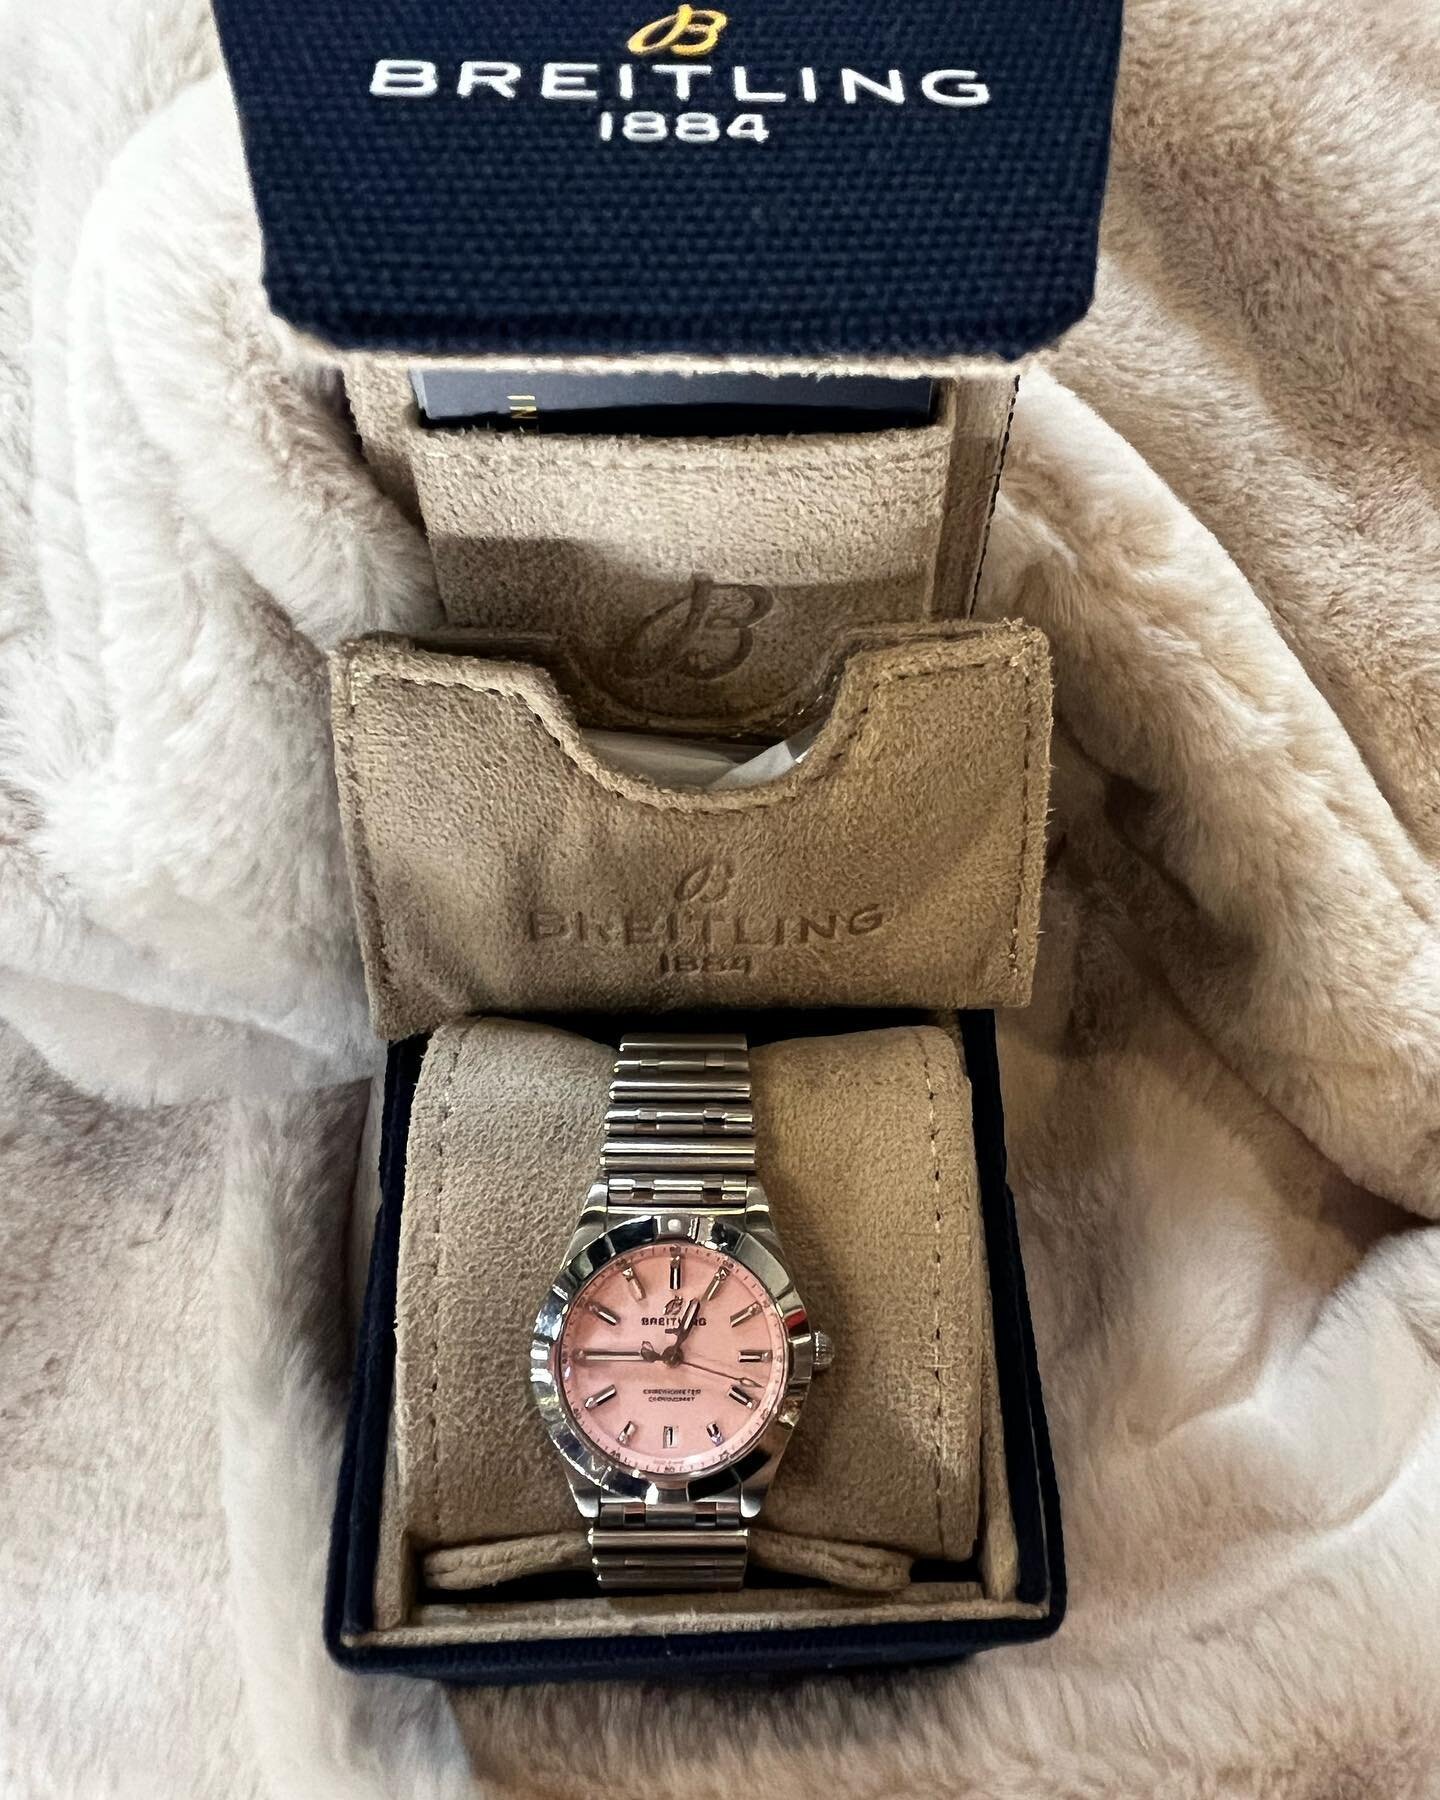 Tick tock ⏱️
Only a matter of time before these new arrivals are found and ❤️ loved again!

1. Breitling Watch. $300.95
2. Fendi Watch $200.95